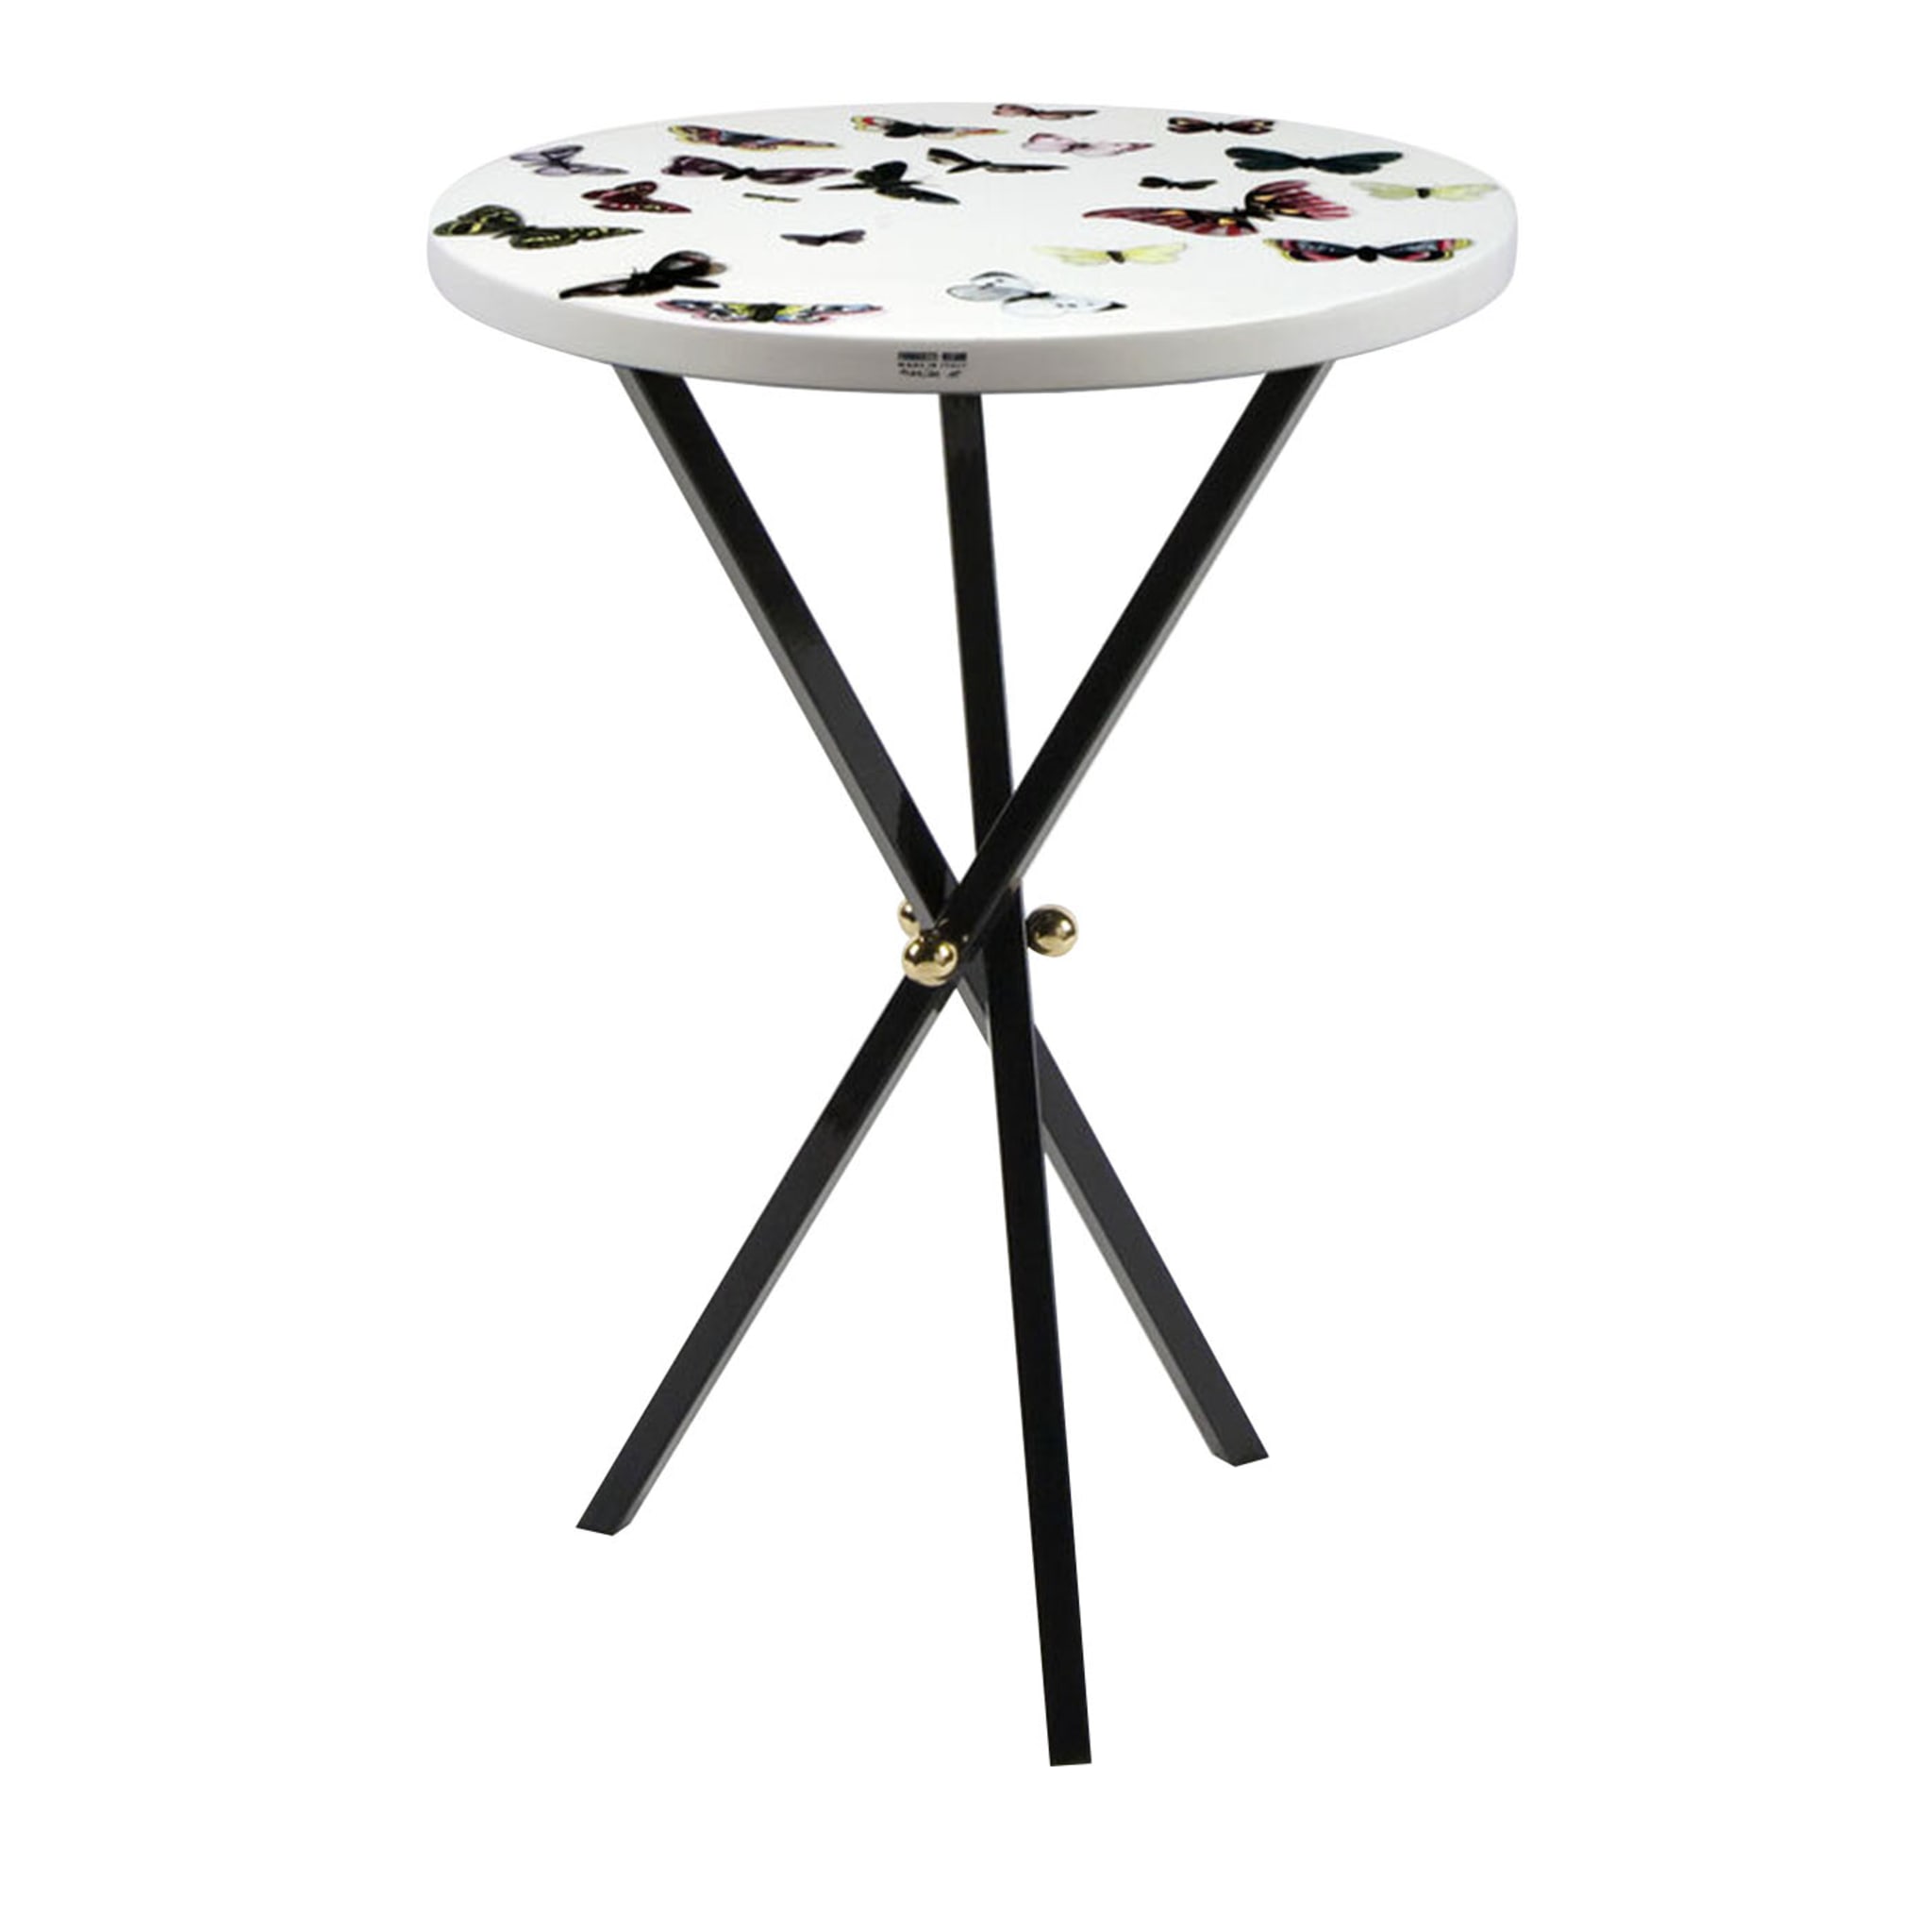 Table d'appoint blanche Farfalle - Vue principale